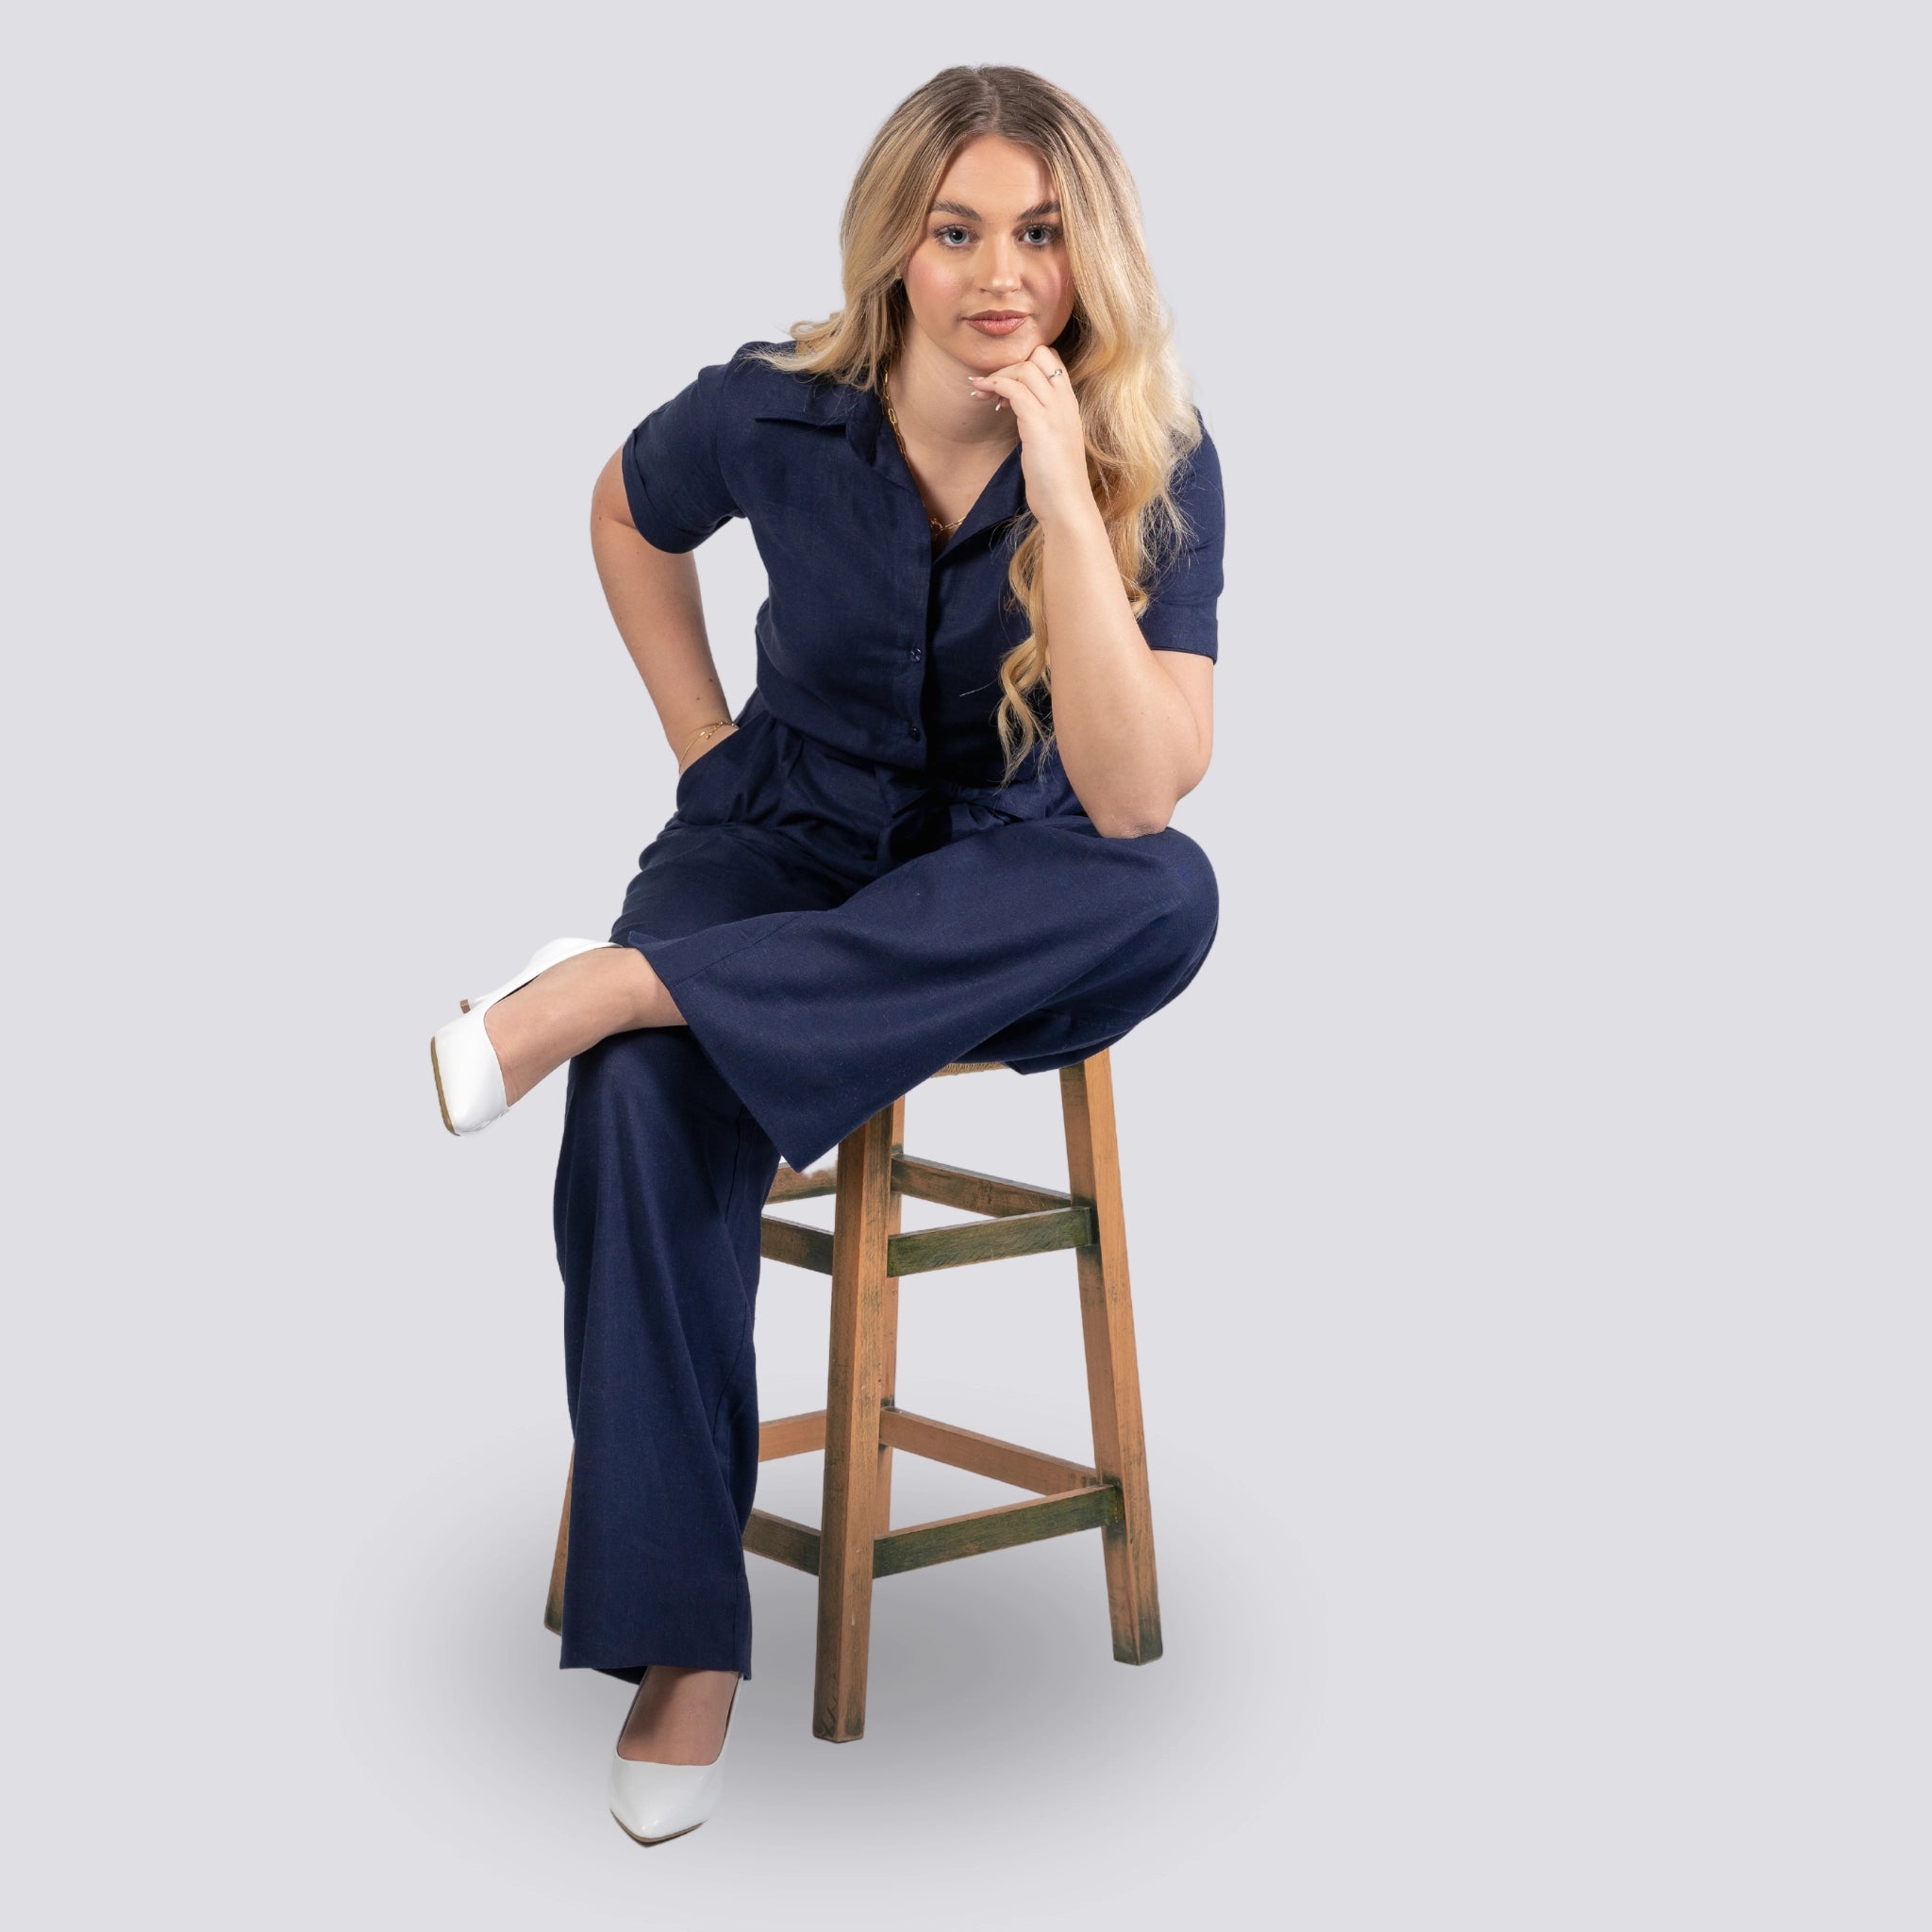 A woman in a Midnight Blue Elegance Viscose Linen Jumpsuit by Karee sitting on a wooden stool against a grey background, looking thoughtful.